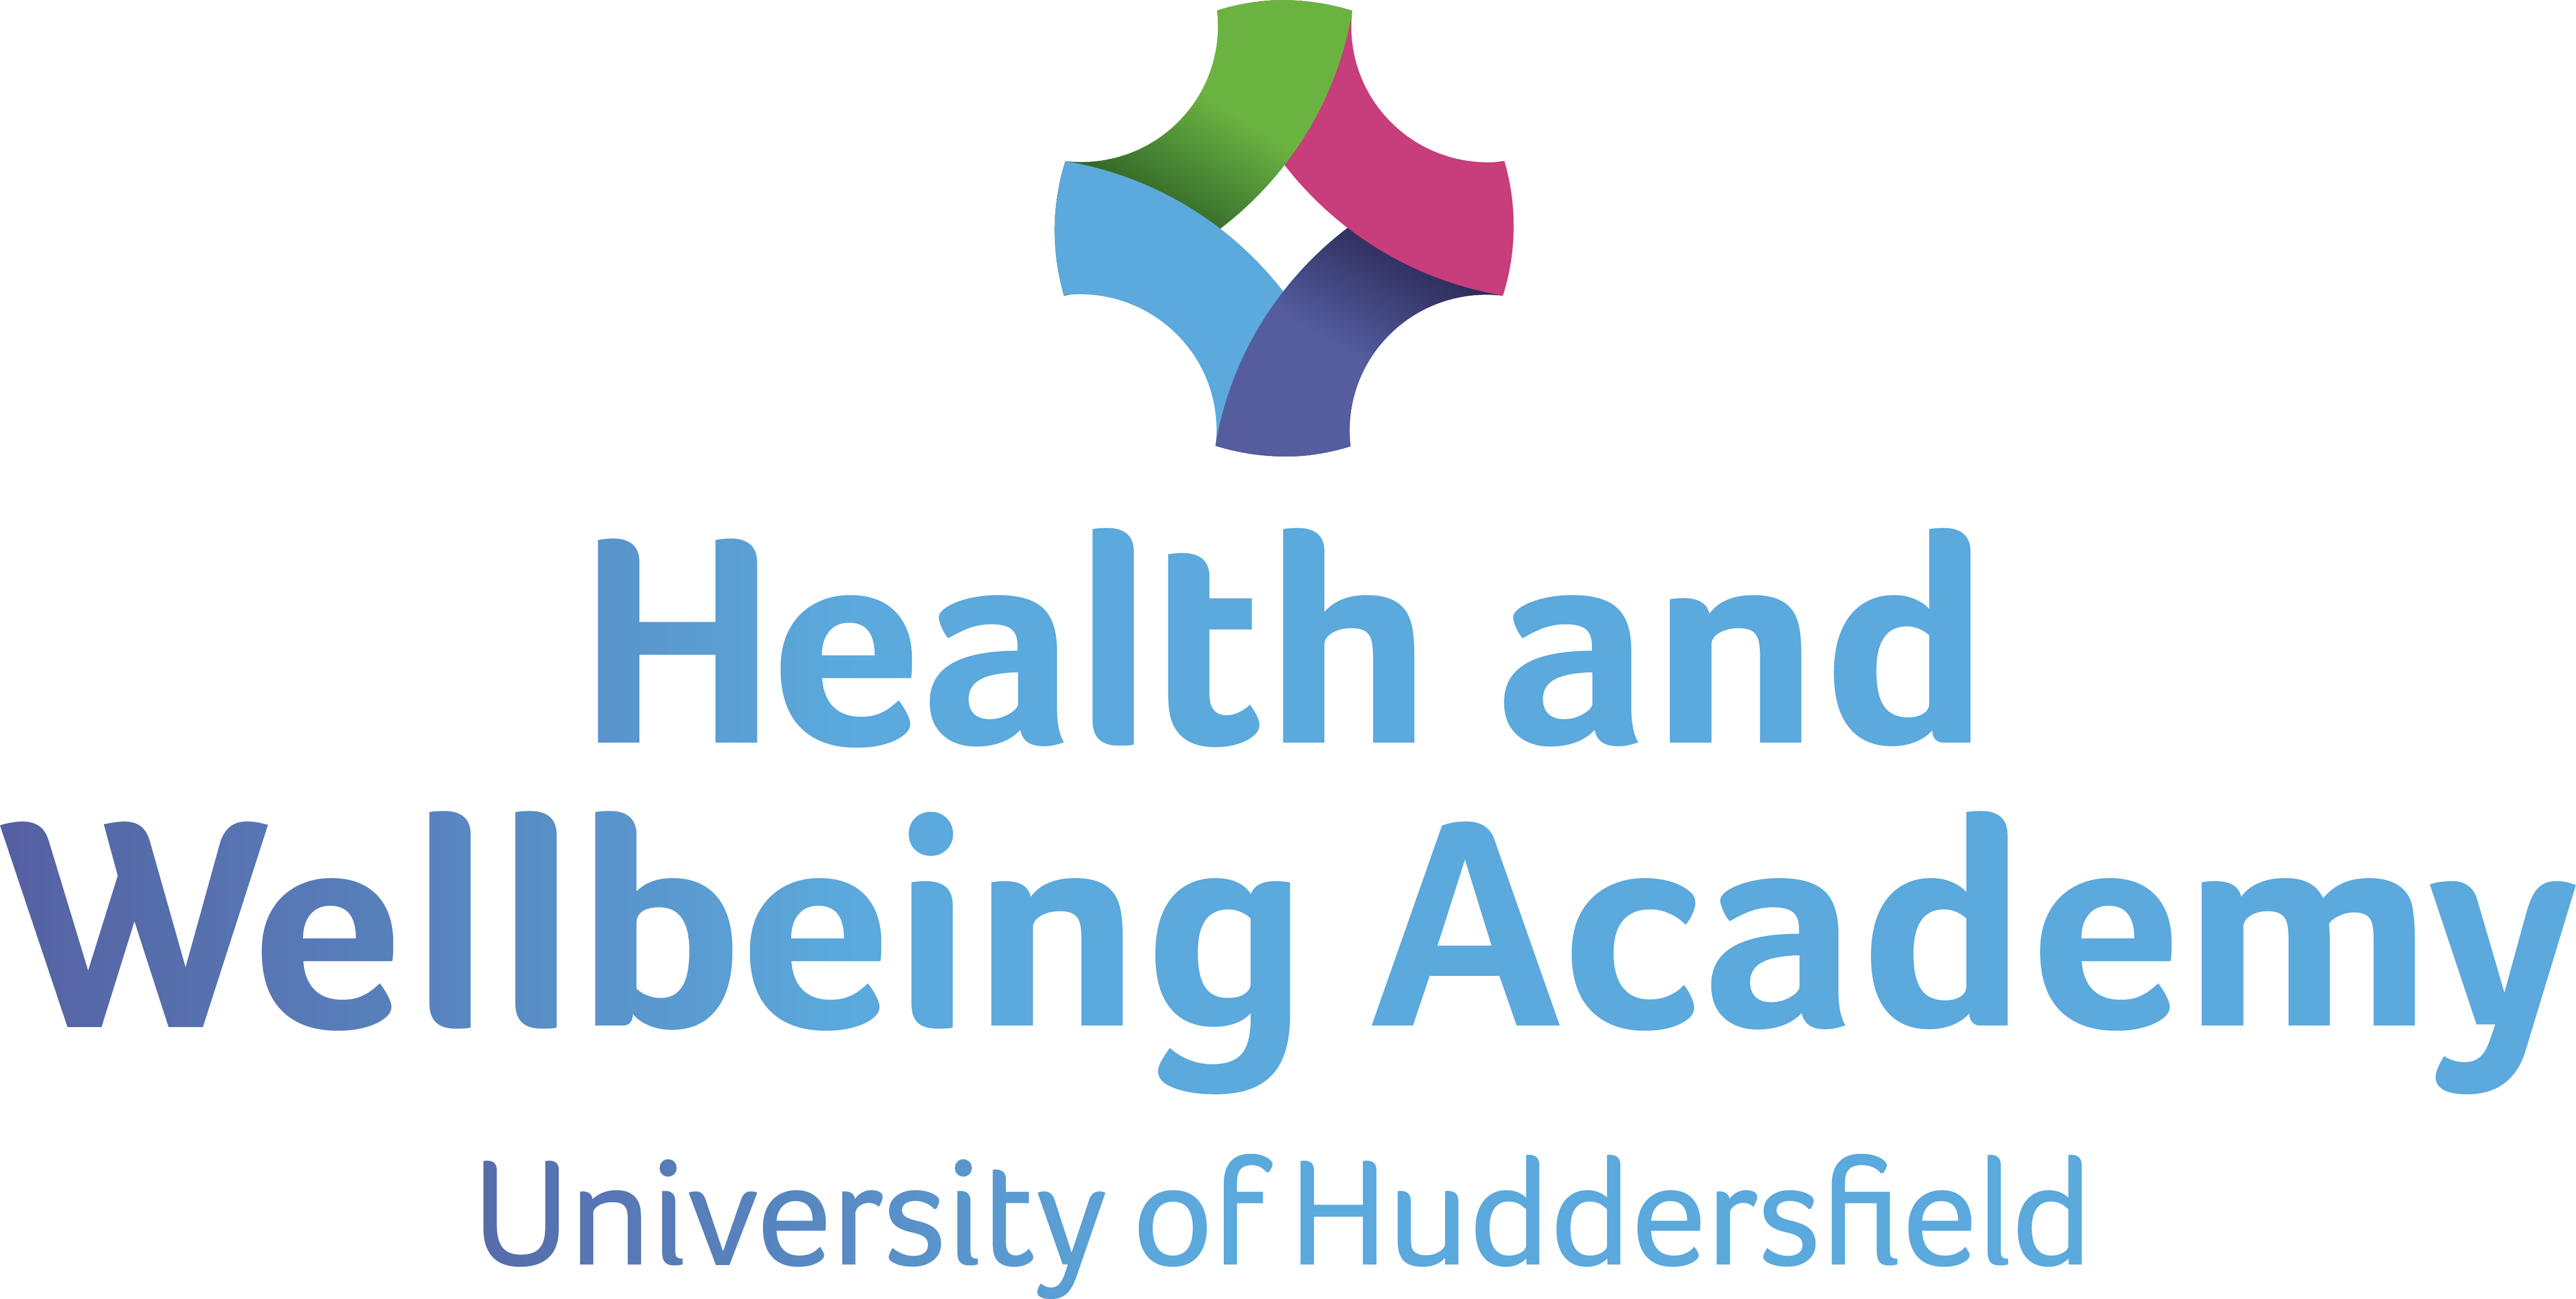 The logo for the University of Huddersfield's Health & Wellbeing Academy